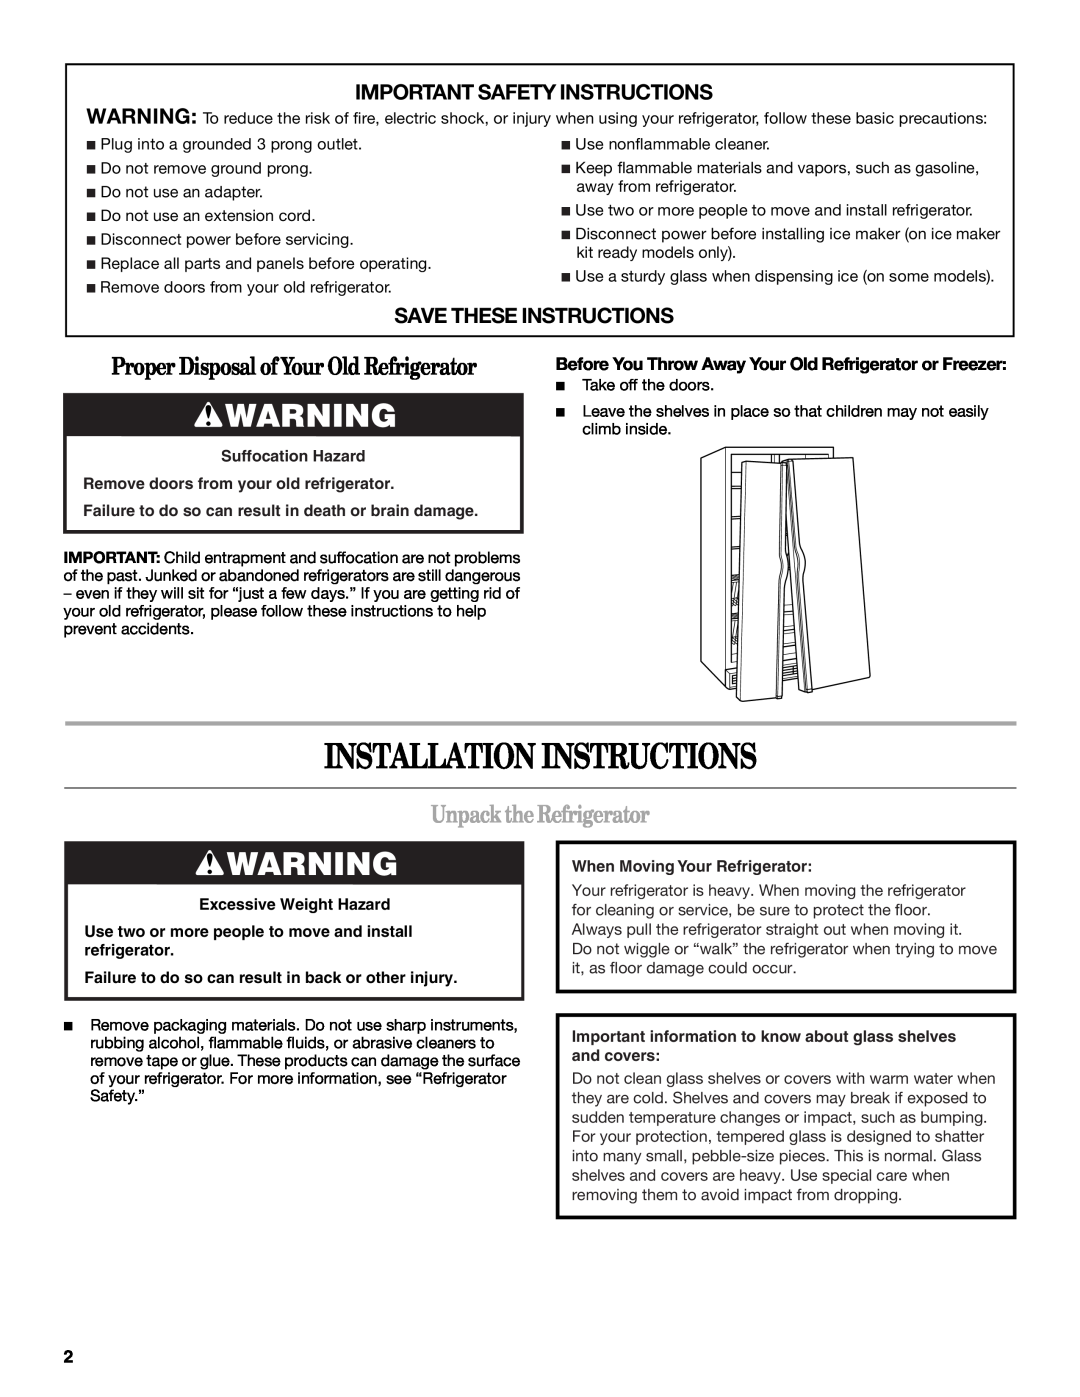 Whirlpool ED2KHAXV Installation Instructions, Unpack the Refrigerator, Important Safety Instructions 